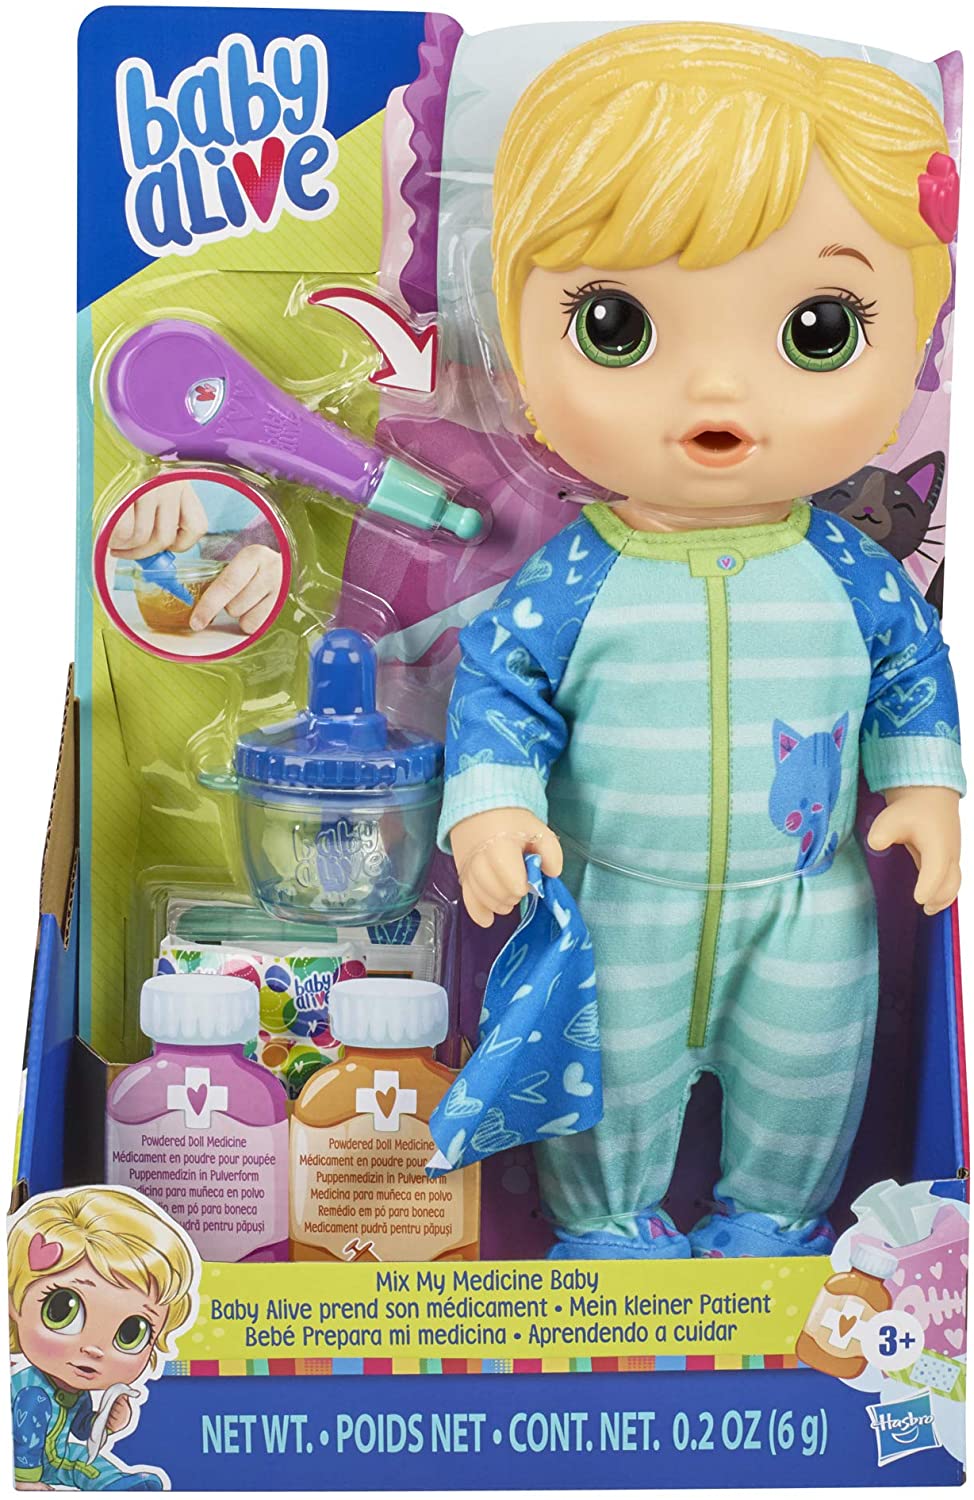 Baby Alive Mix My Medicine Babypop, Kitty Cat Pyjama Drinks and Wets Doctor Accessoires